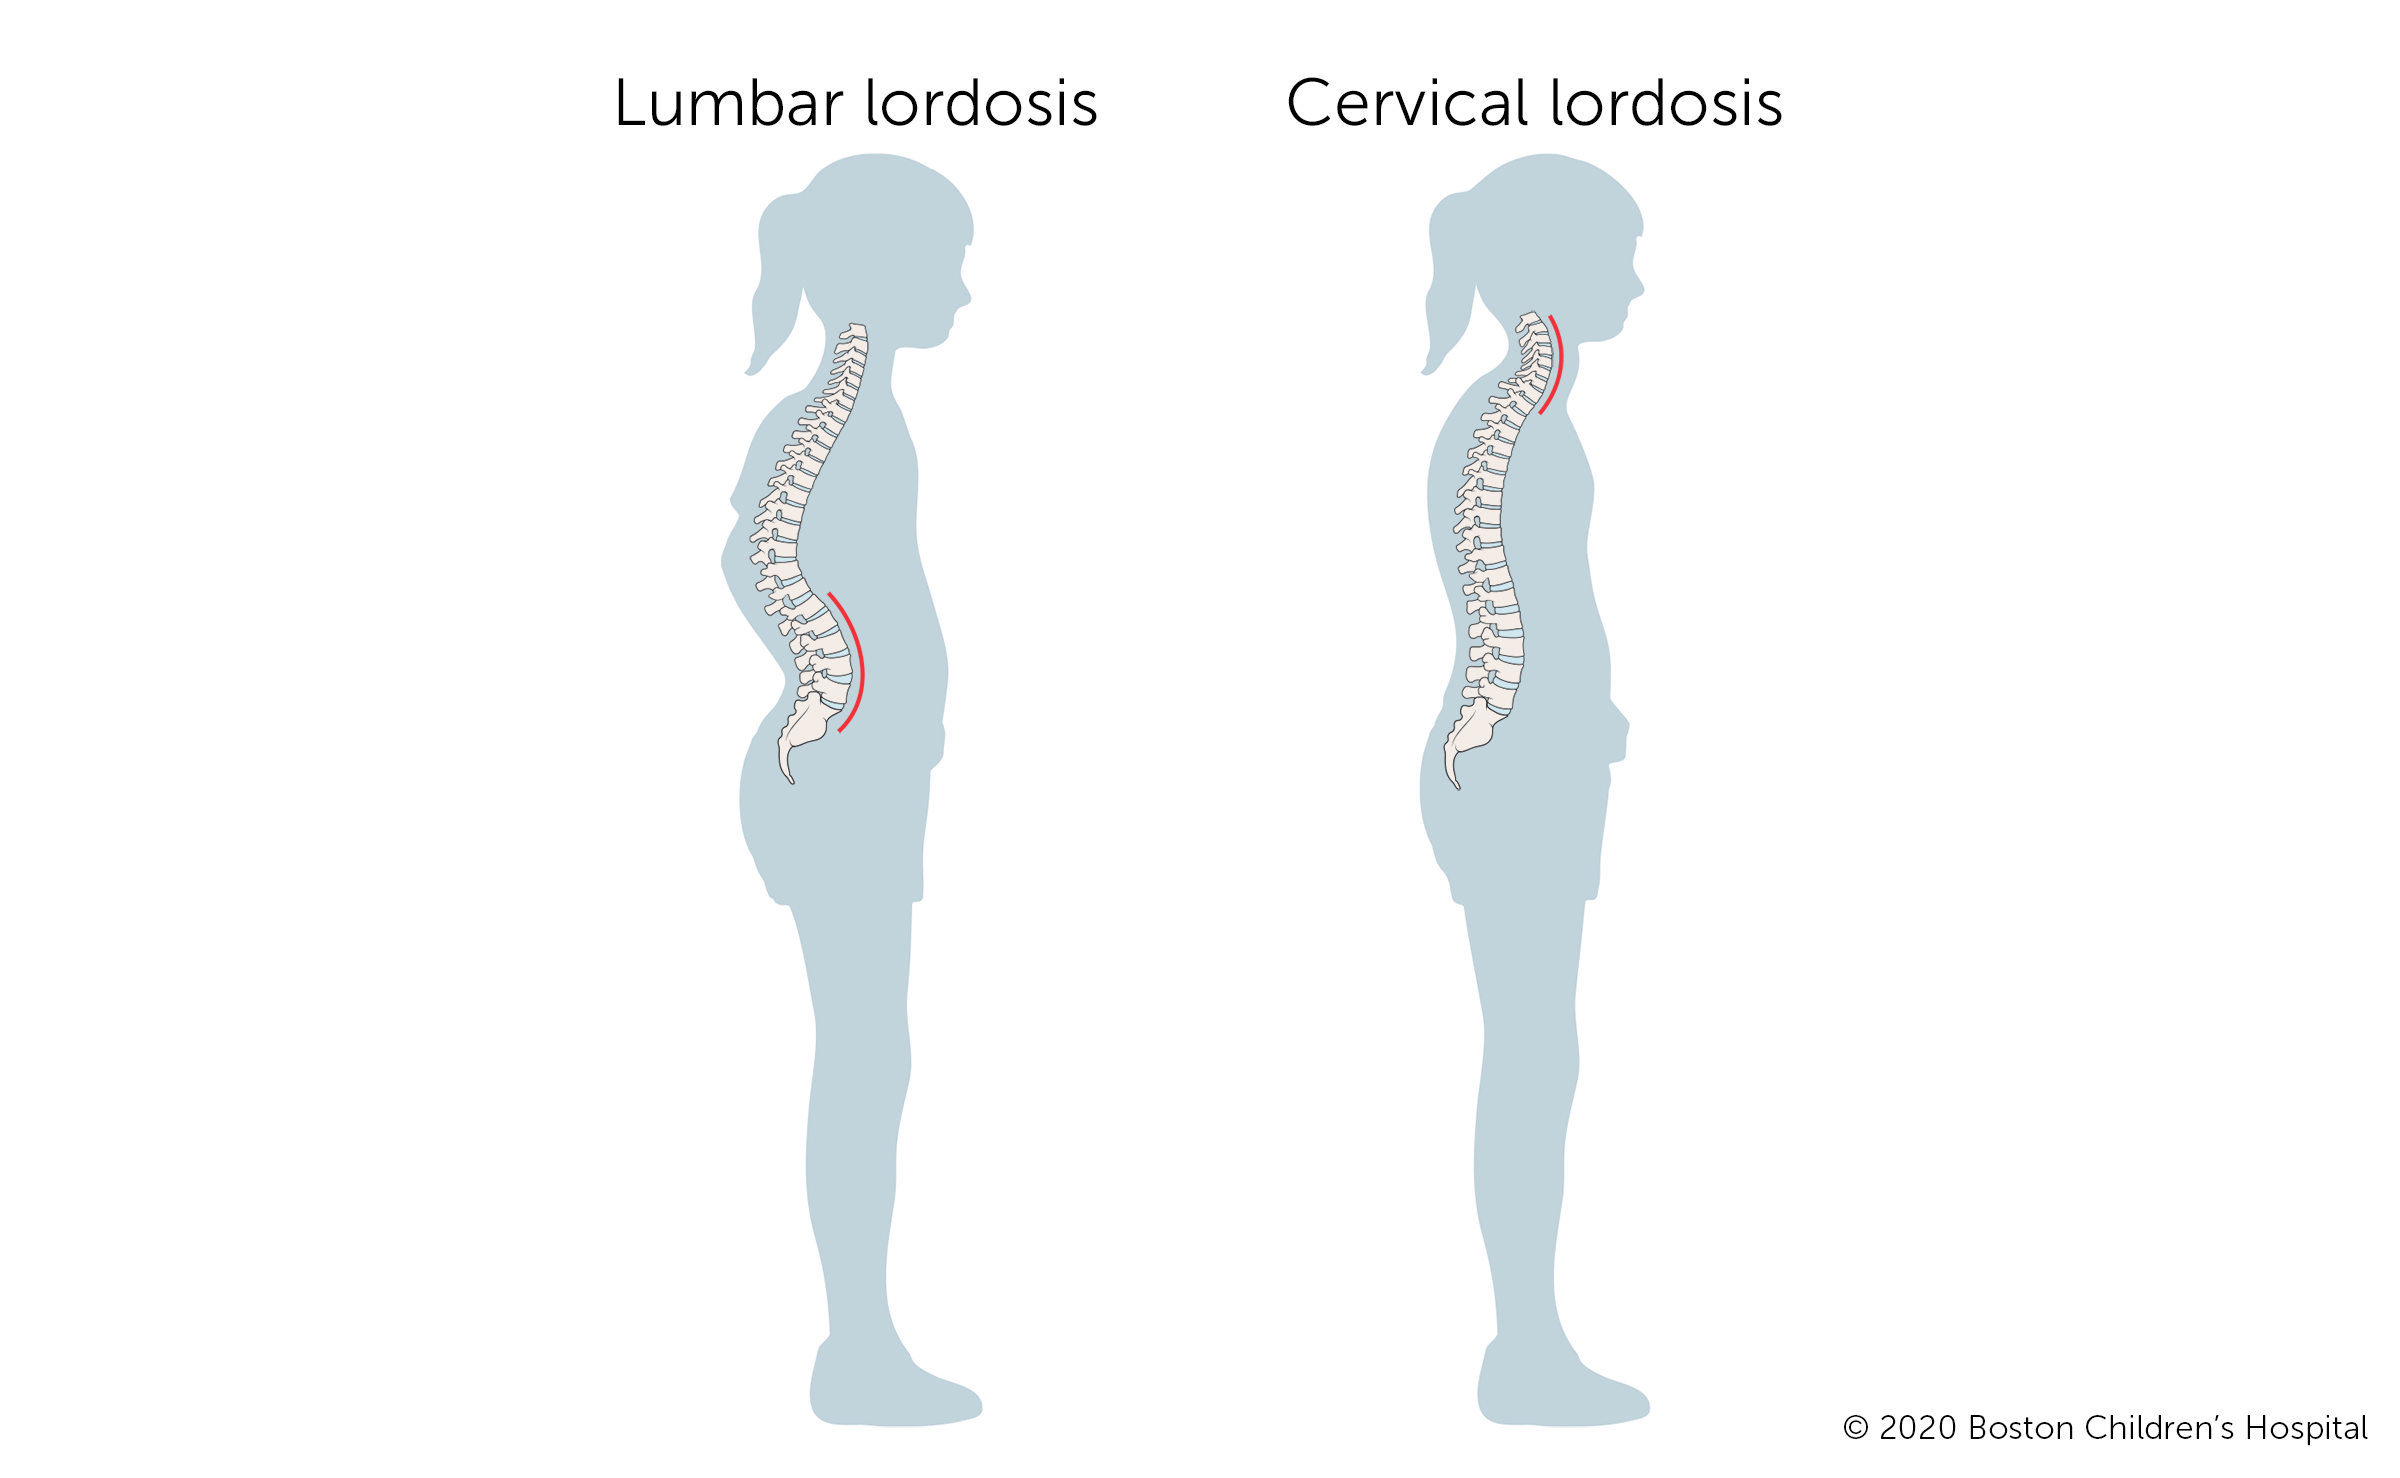 Image: How lumbar lordosis looks compared to cervical lordosis.